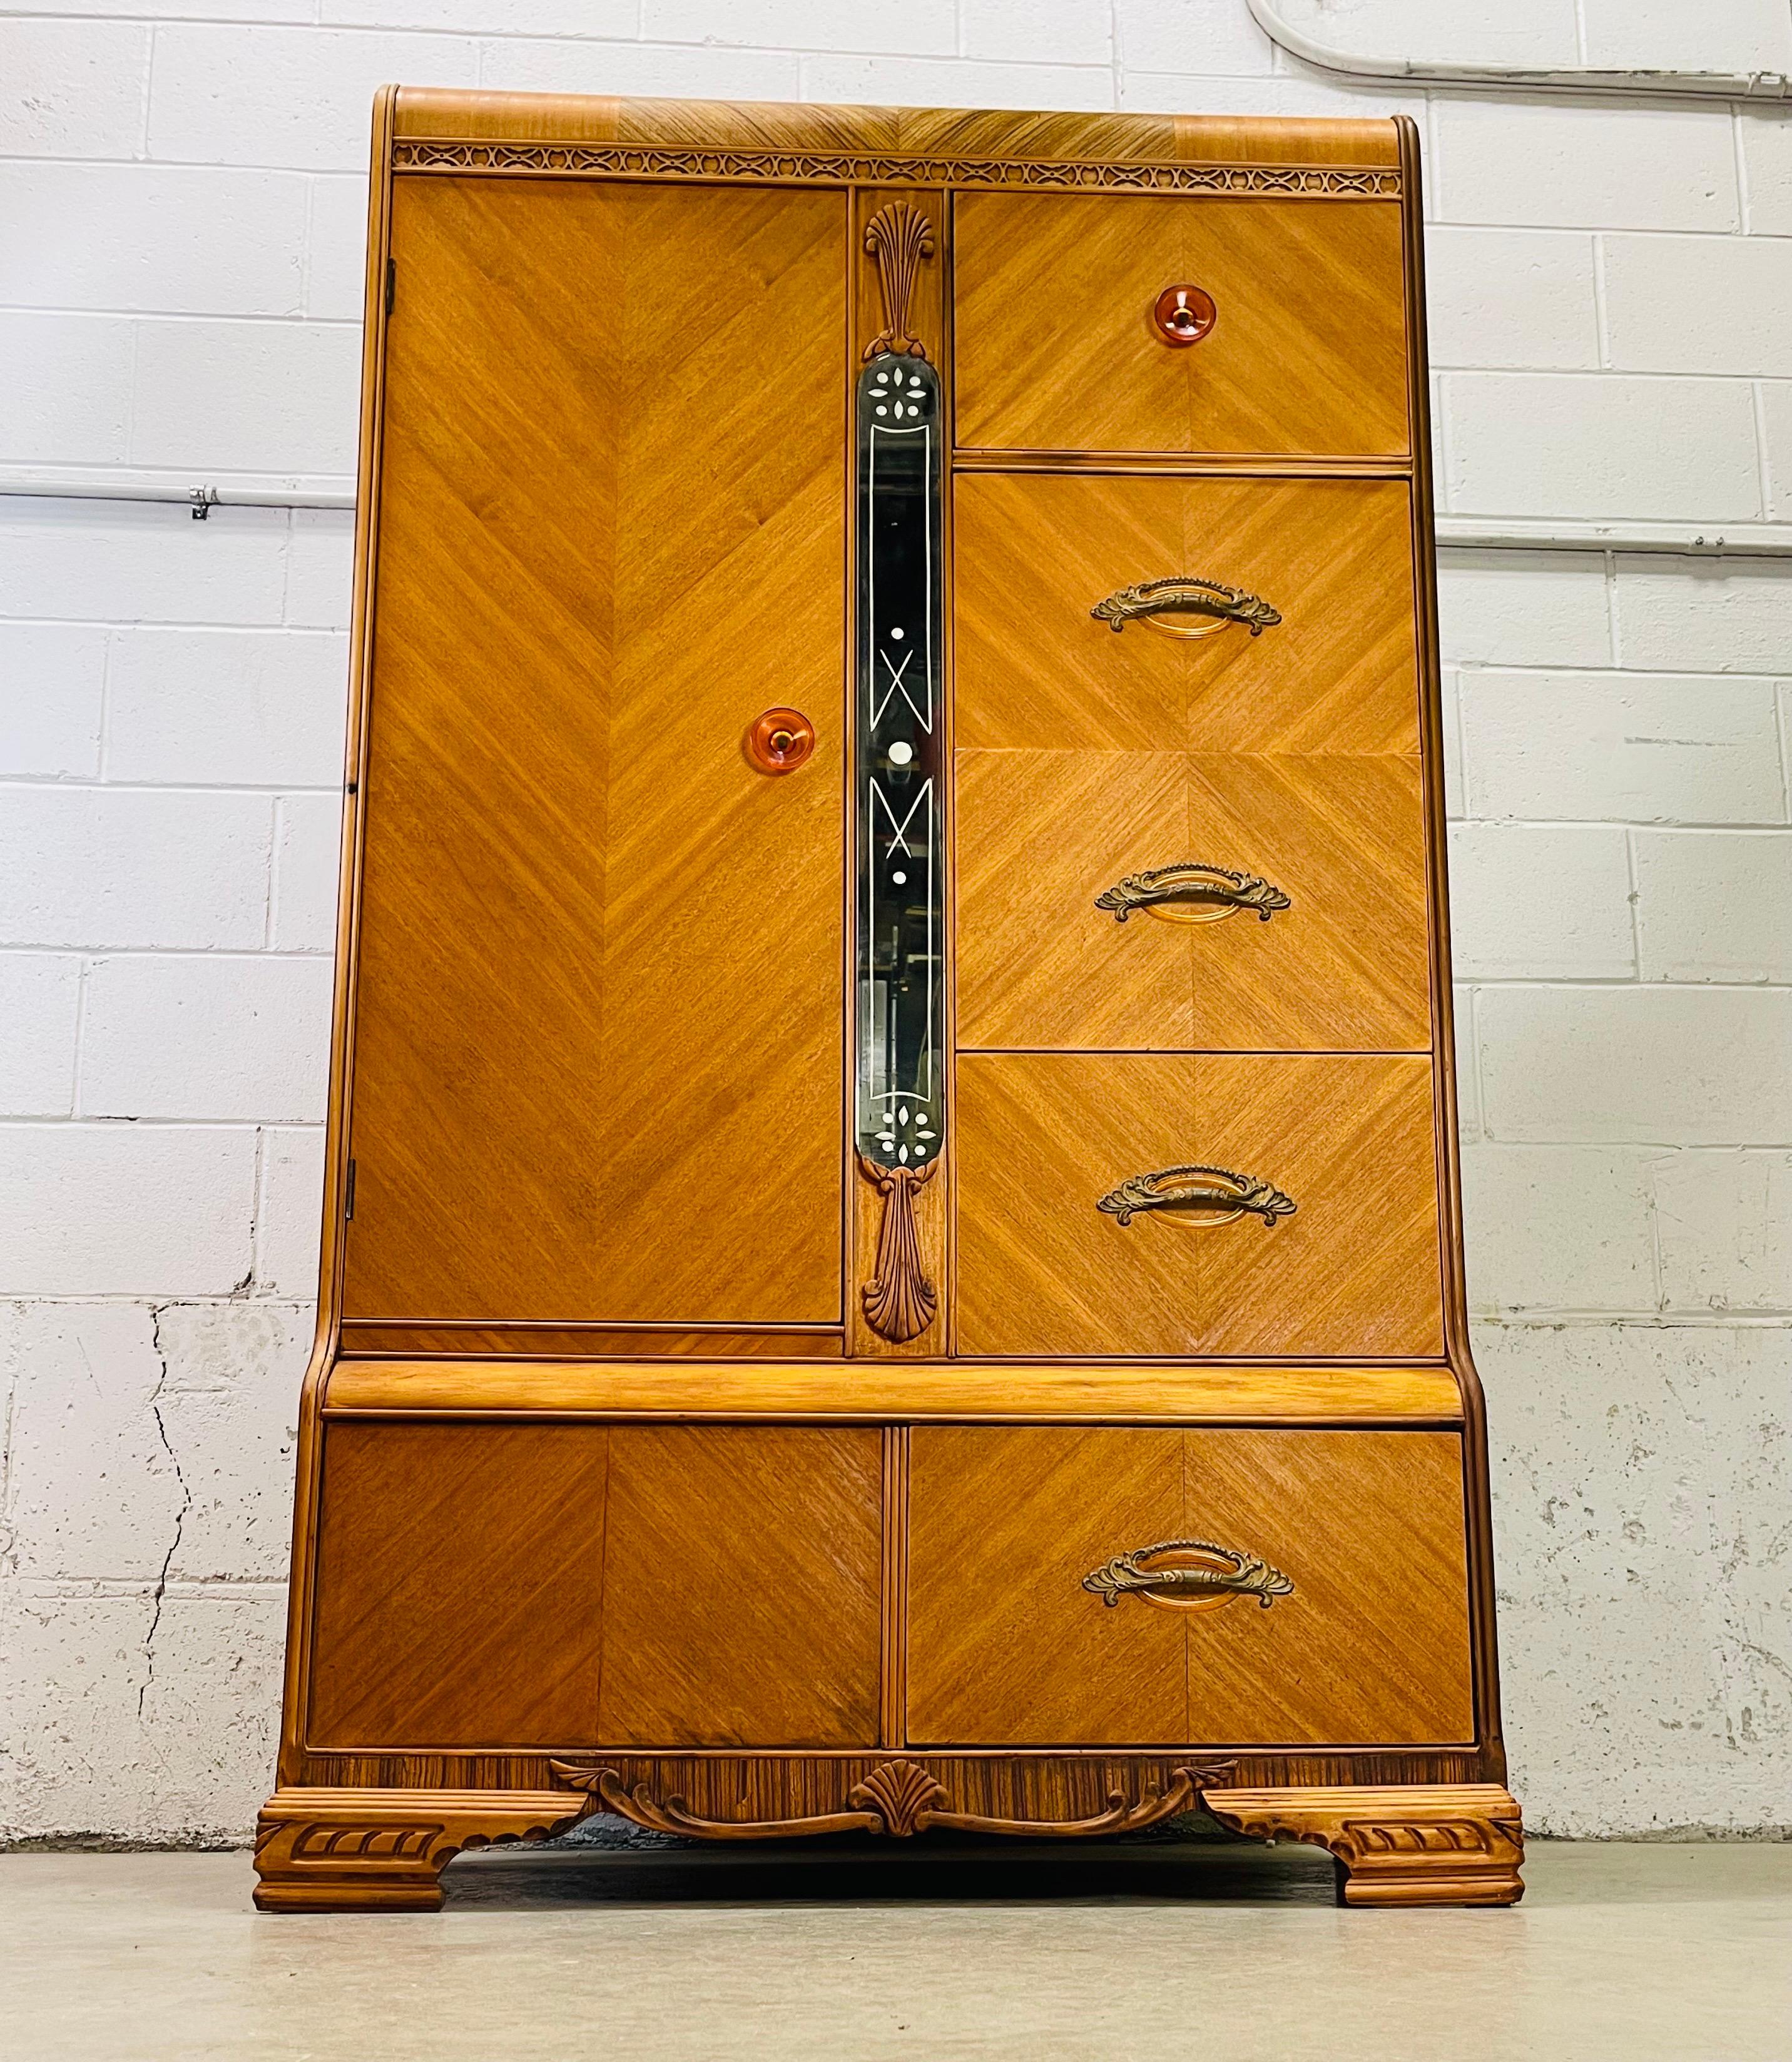 Art Deco tall waterfall style armoire wardrobe. The armoire has a veneer chevron design with accents of zebra wood. The armoire has bakelite pulls and a mirror in the center. All the drawers are 9”H for lots of storage. The cedar lined closet